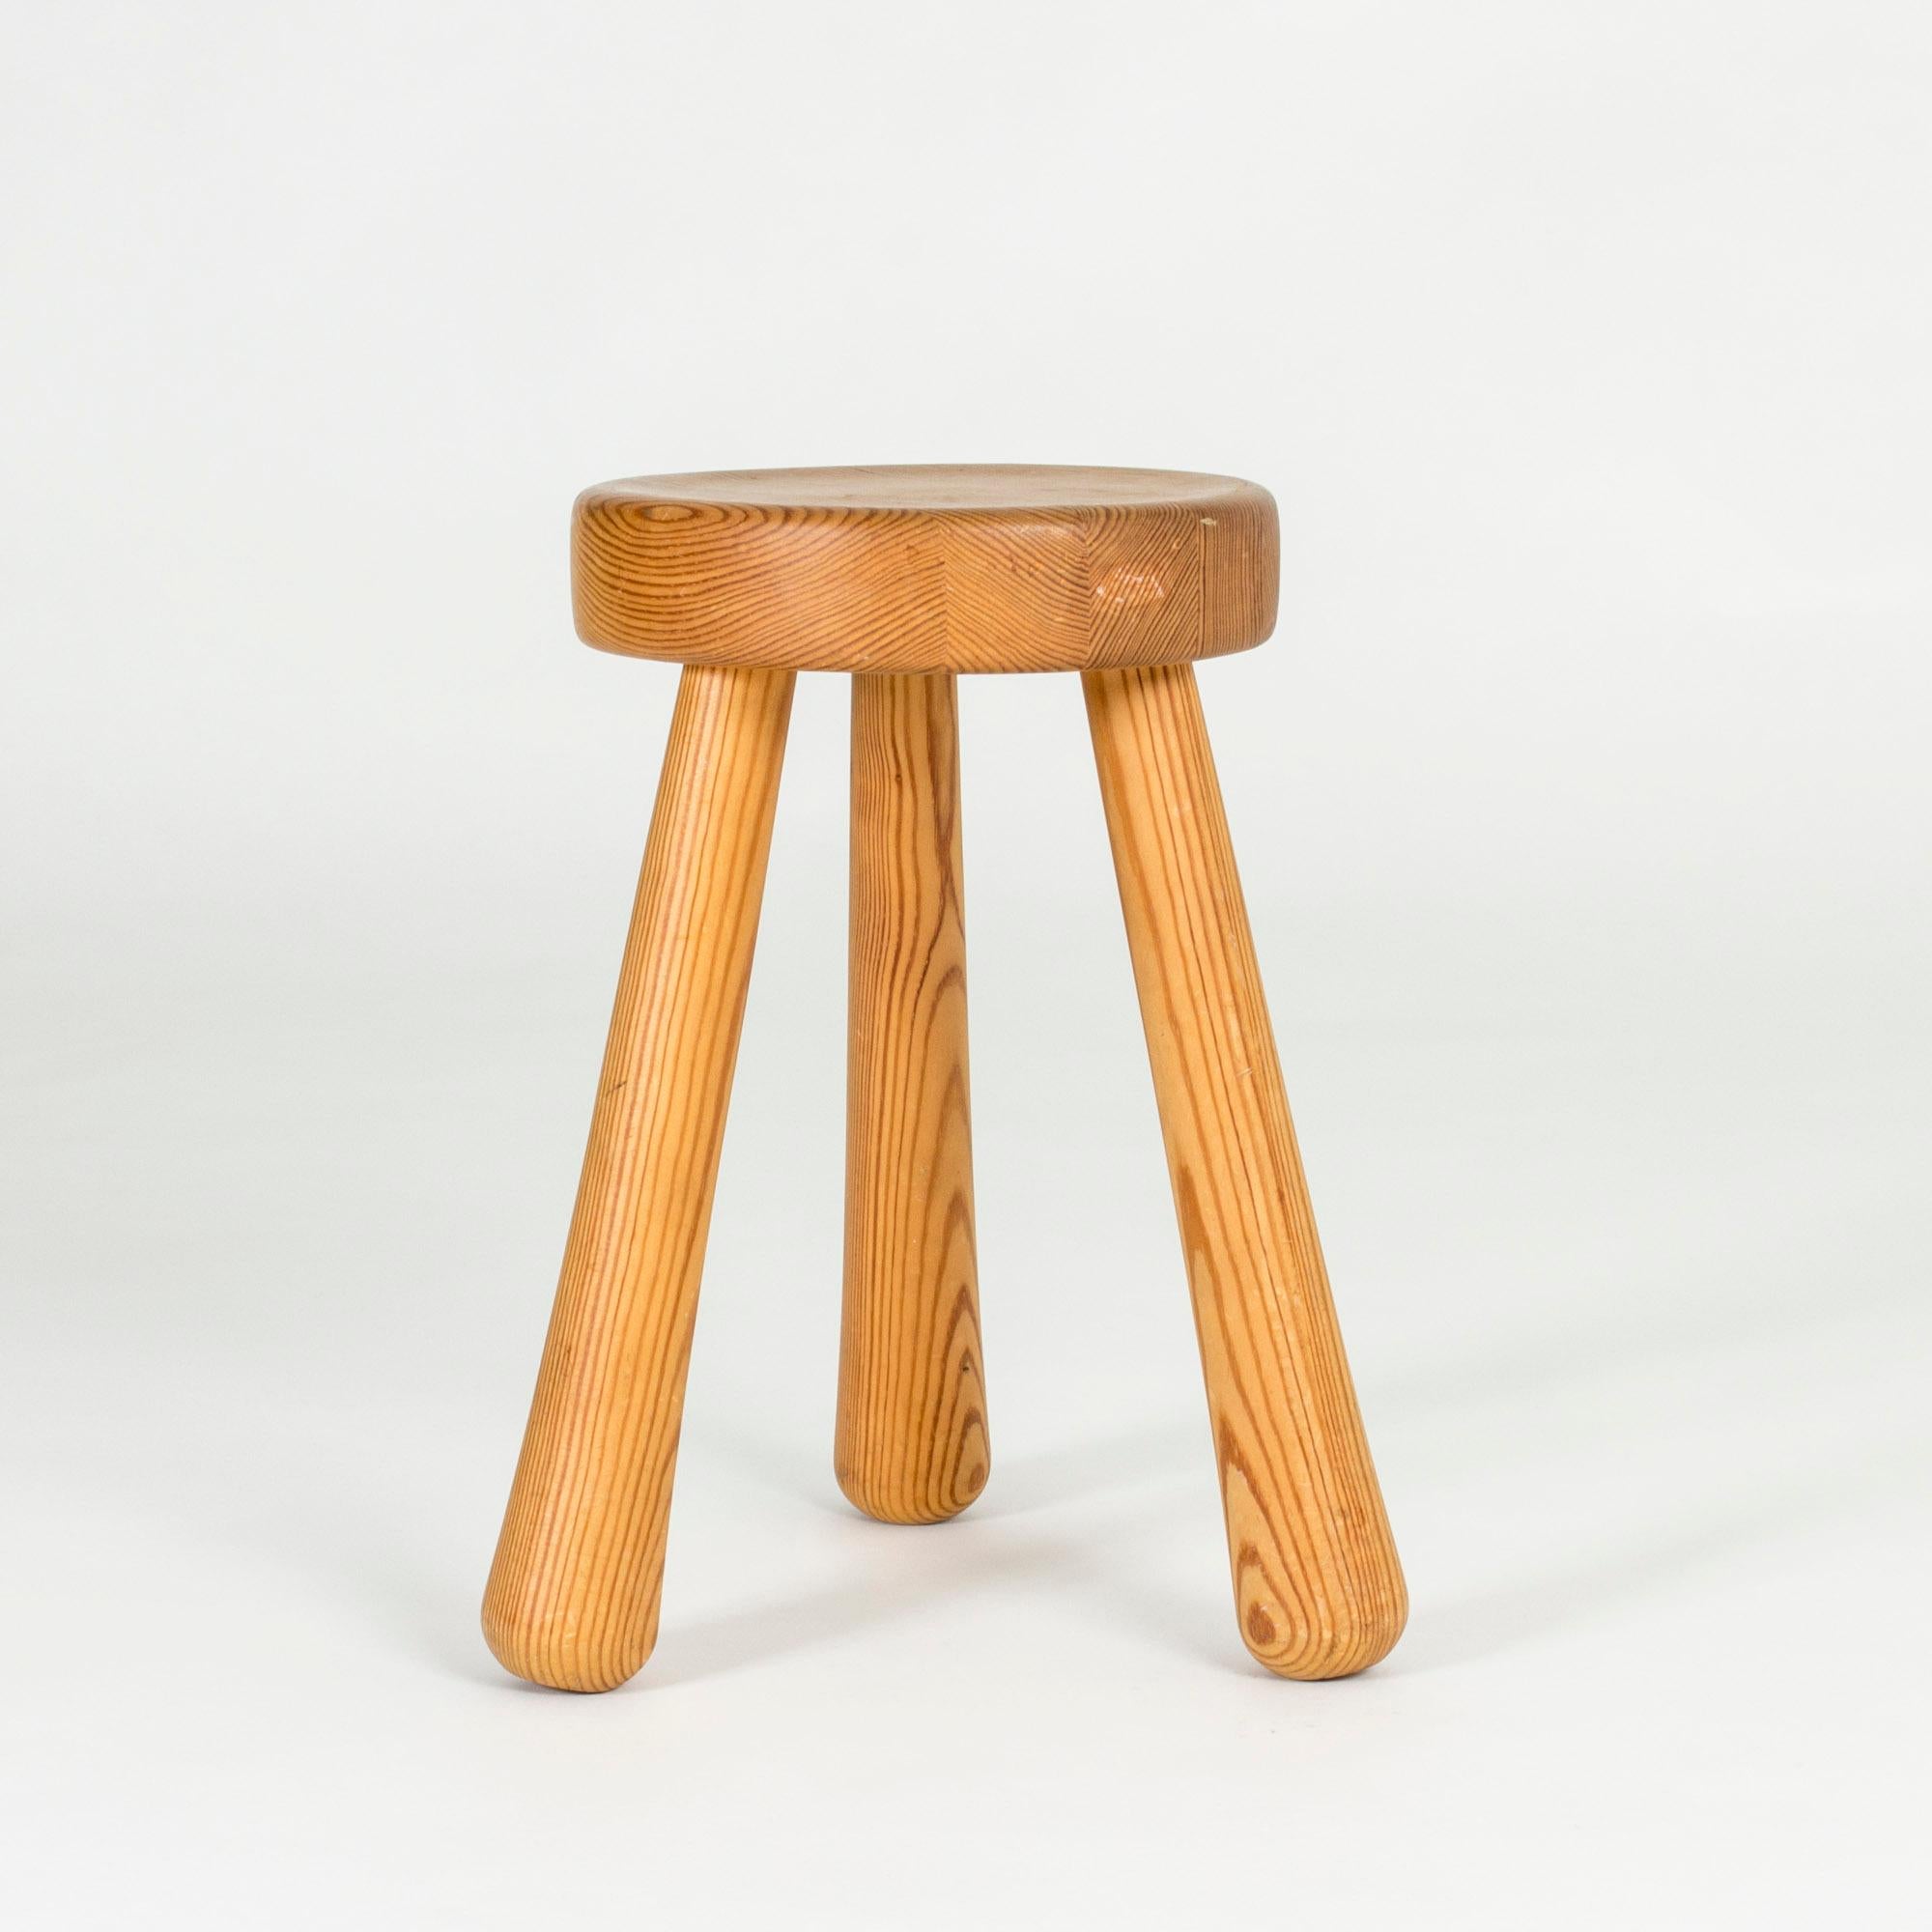 Chunky wooden stool by Ingvar Hildingsson, made from pine with beautiful woodgrain. Three elongated legs and round seat, designed in a clean, appealing shape.